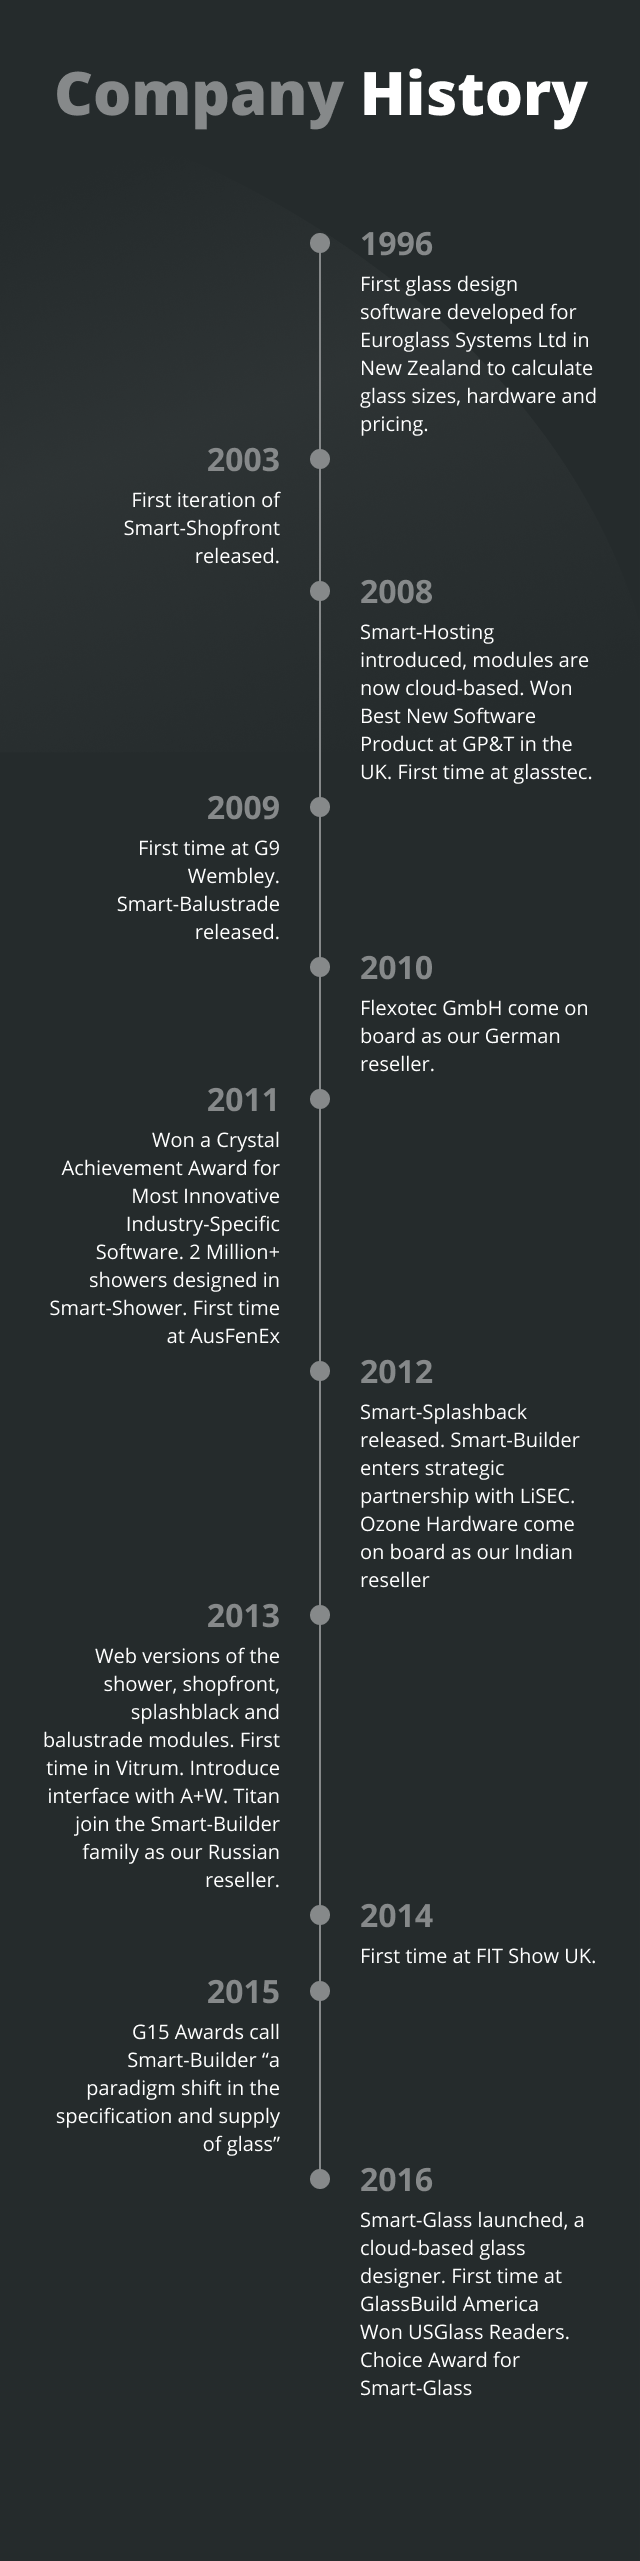 Smart Builder Company History - making great glass software for over 20 years